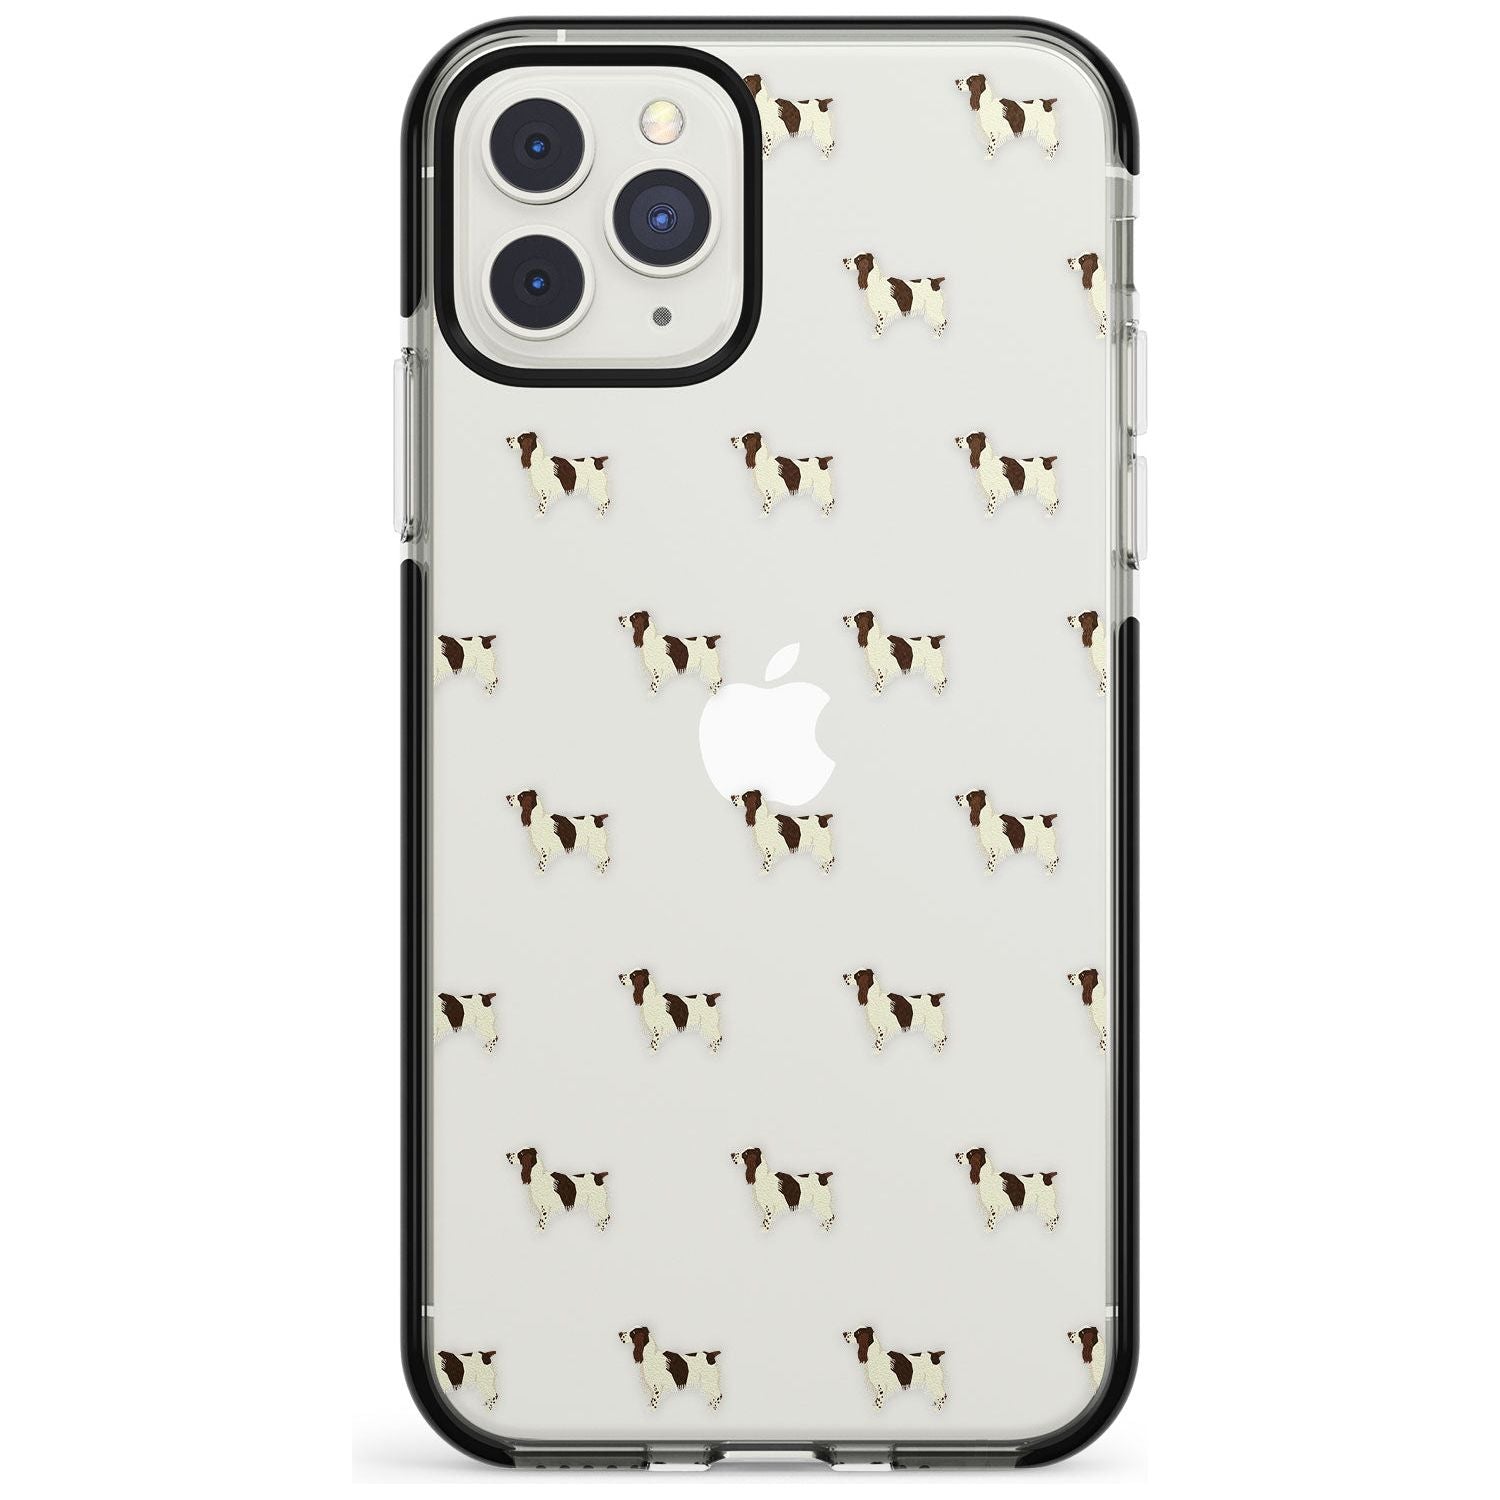 English Springer Spaniel Dog Pattern Clear Black Impact Phone Case for iPhone 11 Pro Max